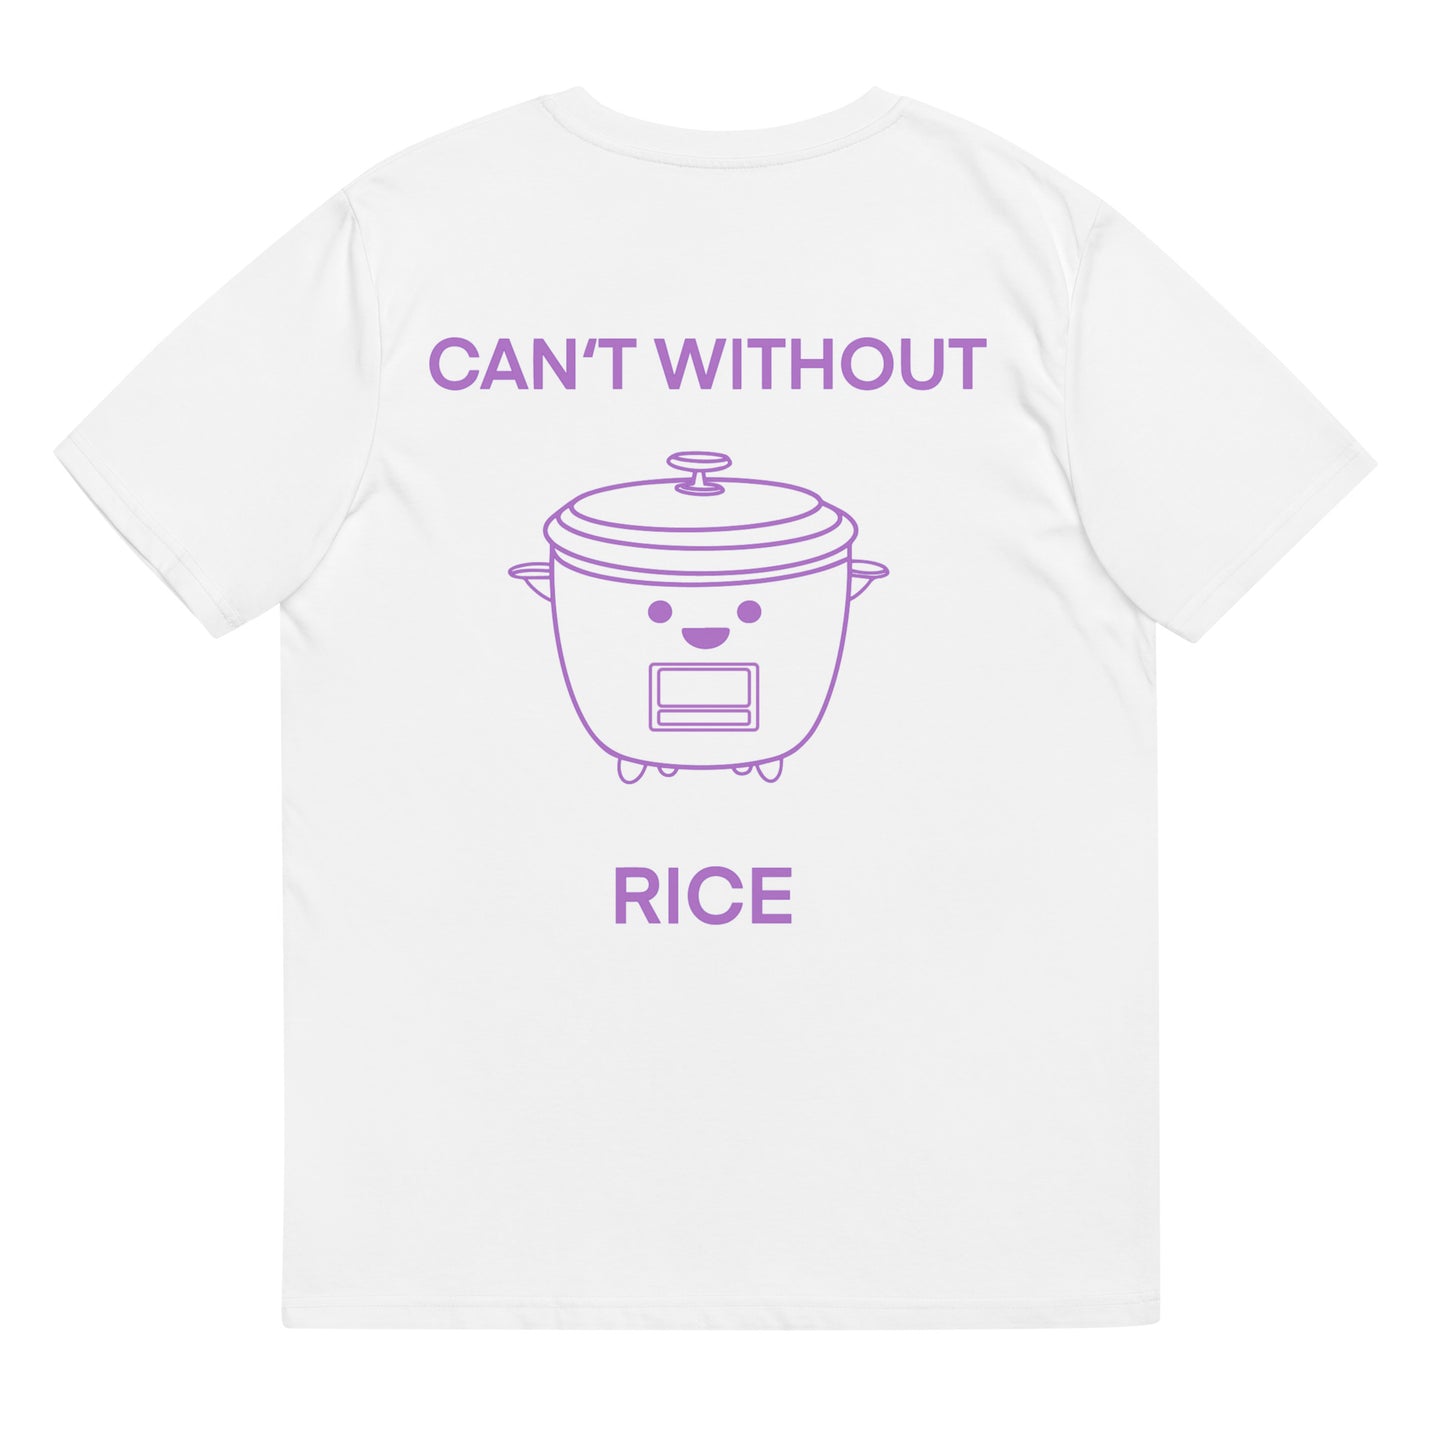 Can't Without Rice T-Shirt White I Organic Cotton